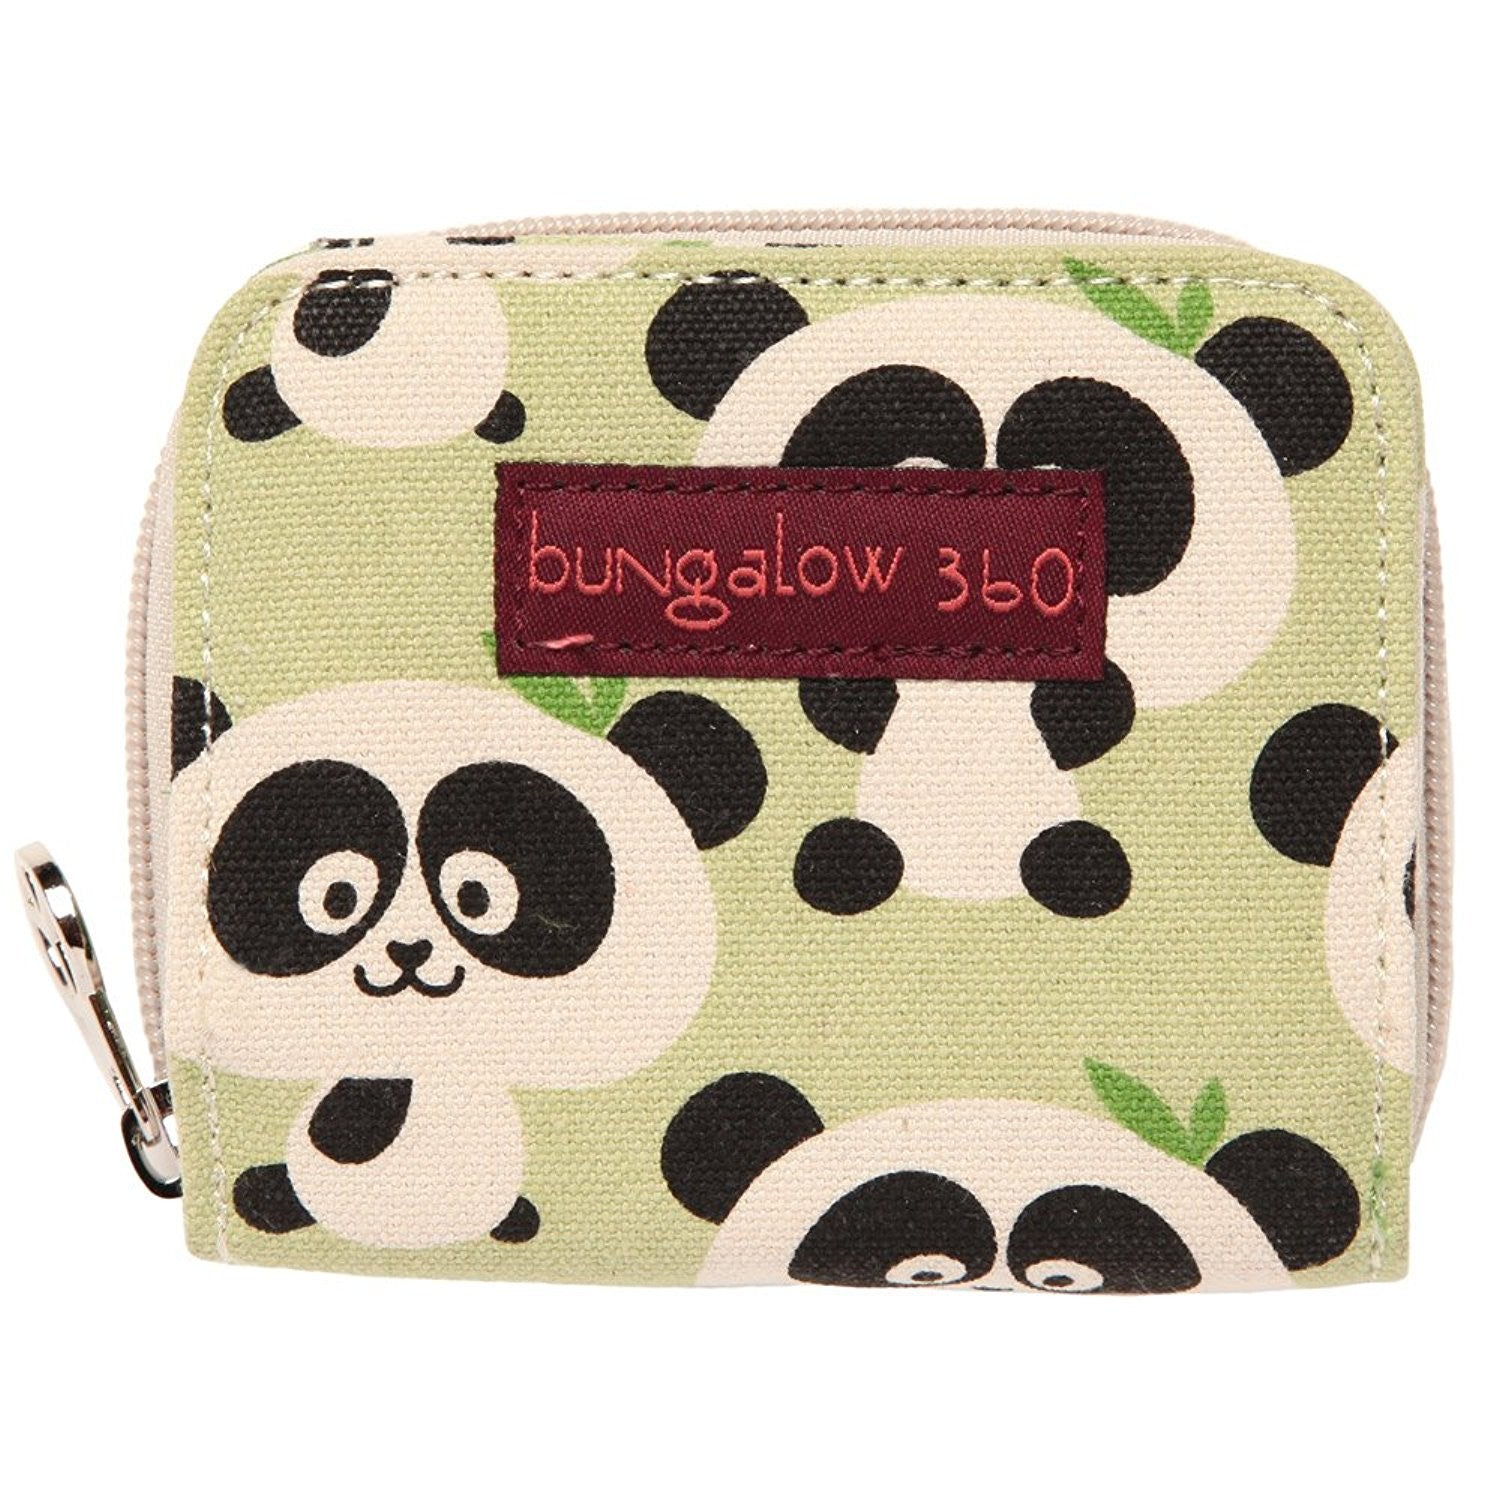 Billfold Wallet by Bungalow360 - Compassionate Closet